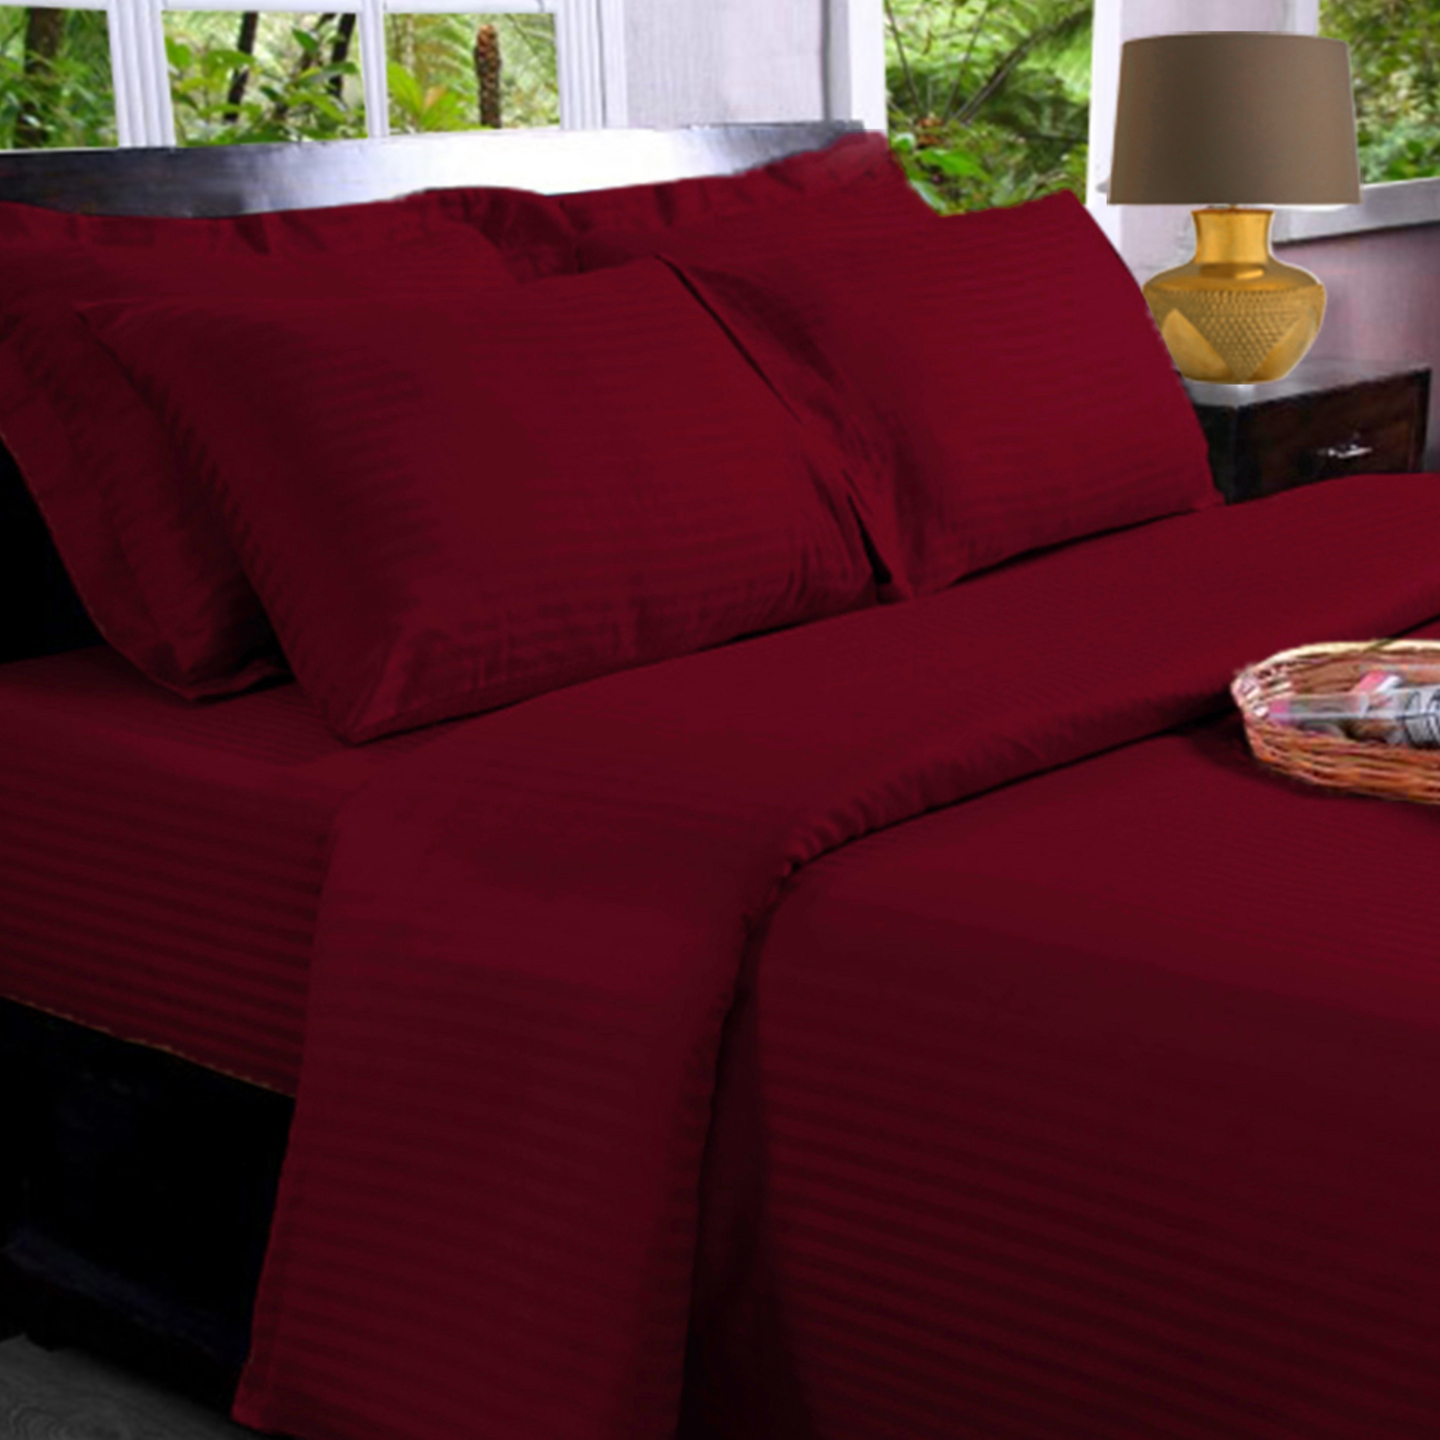 Burgundy Maroon - 100% Cotton - 330 Thread Count Sateen Fitted Sheets -  King Size